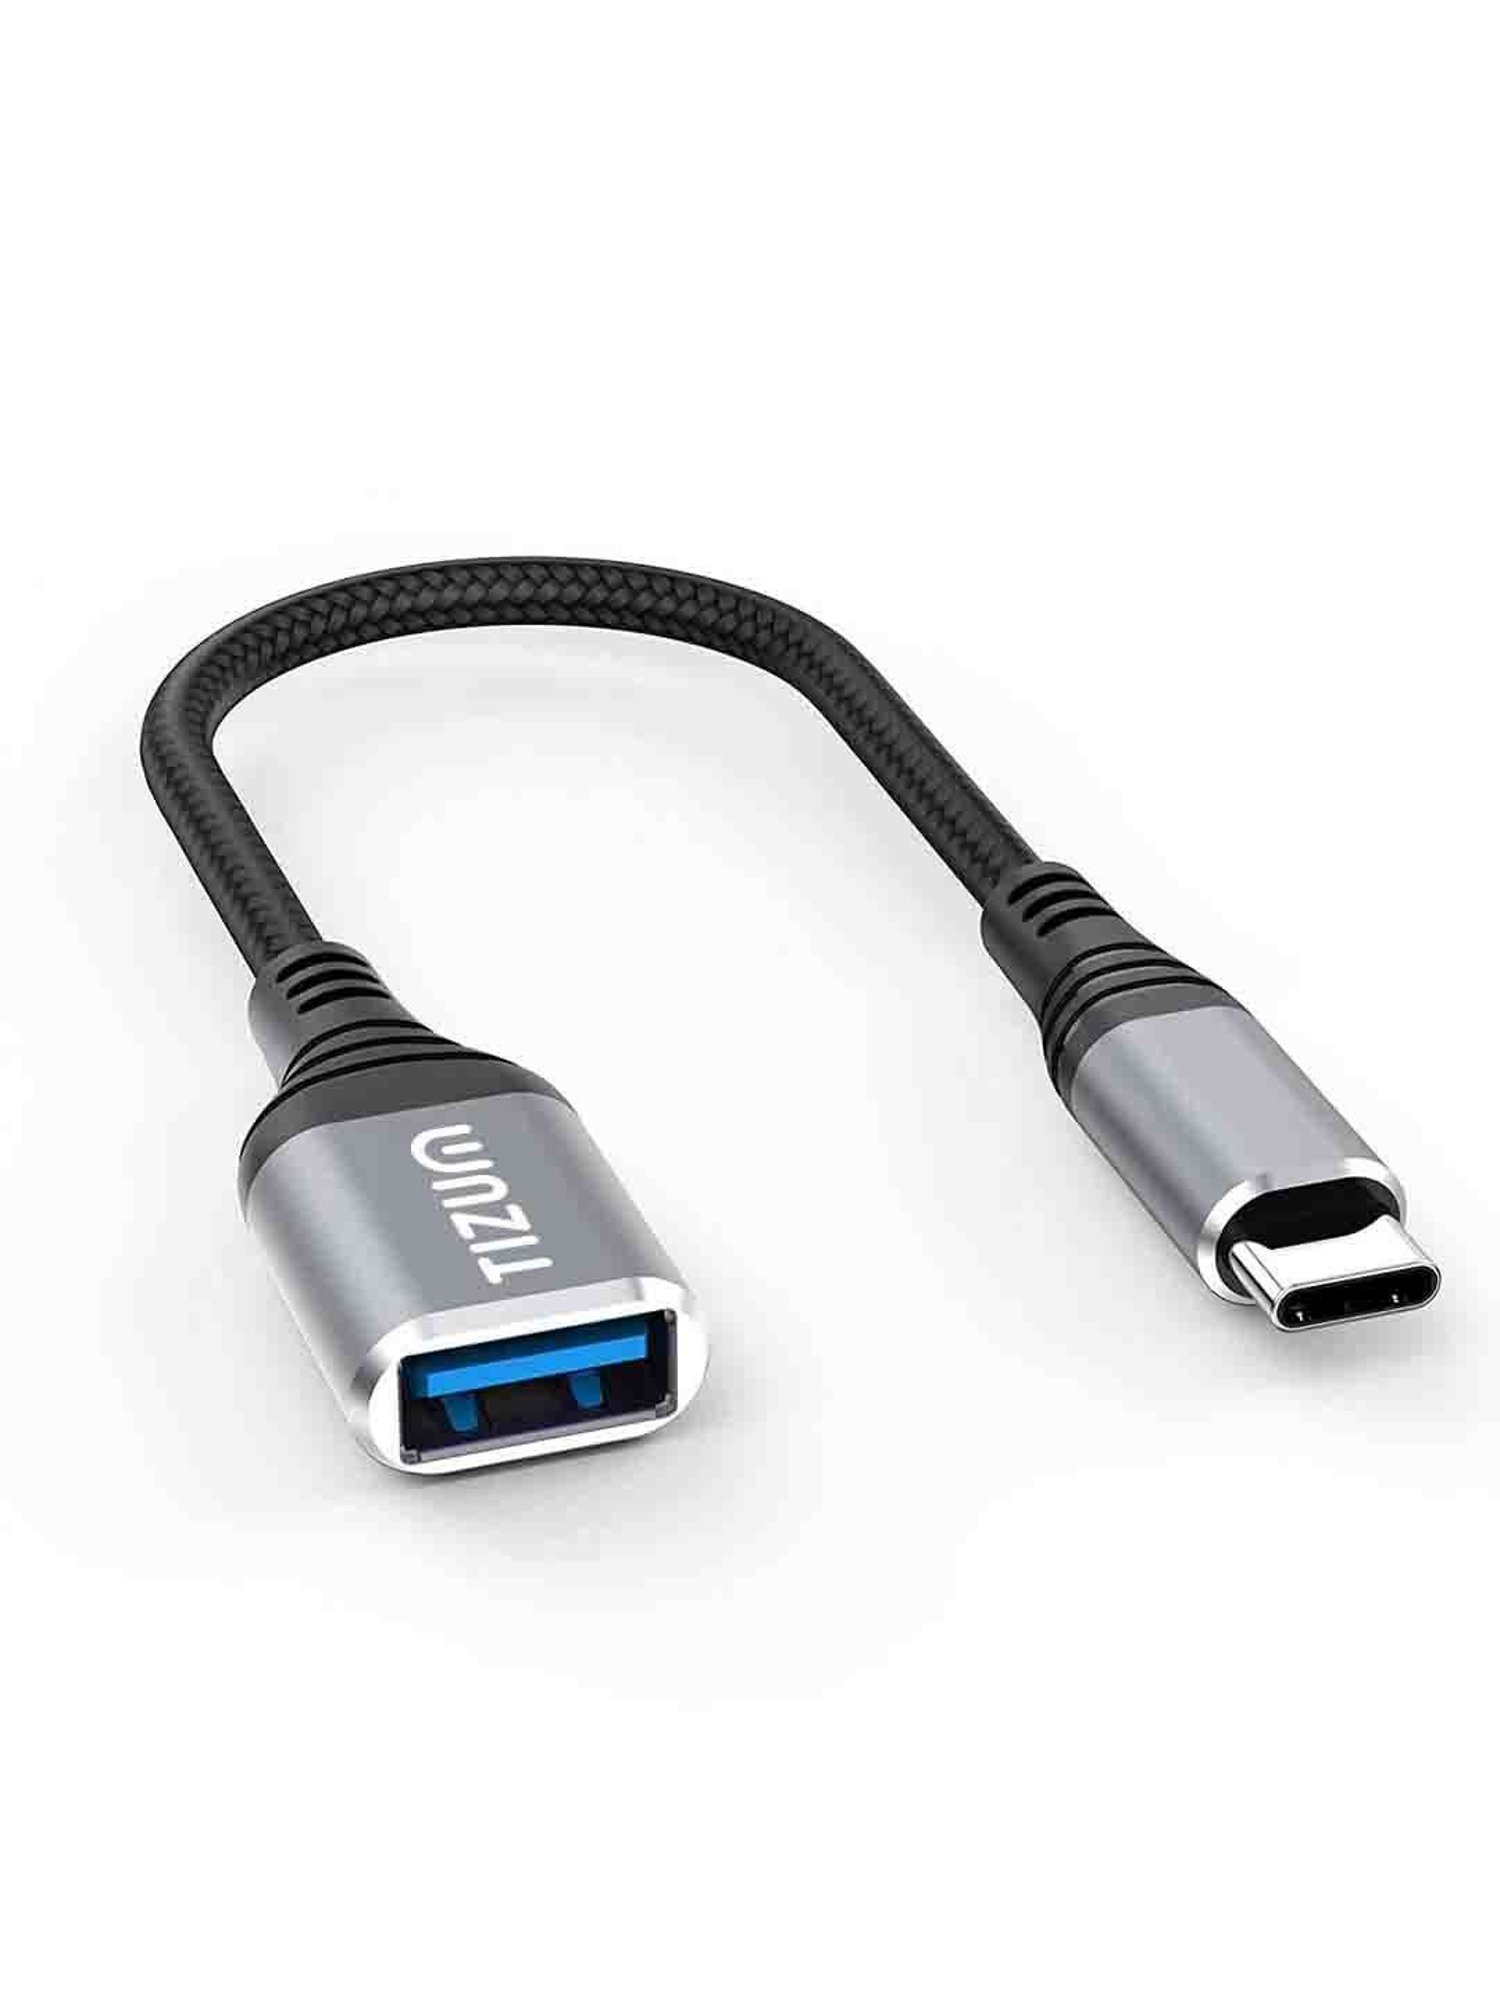 Buy Tizum USB C to USB 3.0 OTG Cable Transfer Speed Upto 4.8 GBPS Online At  Best Price @ Tata CLiQ